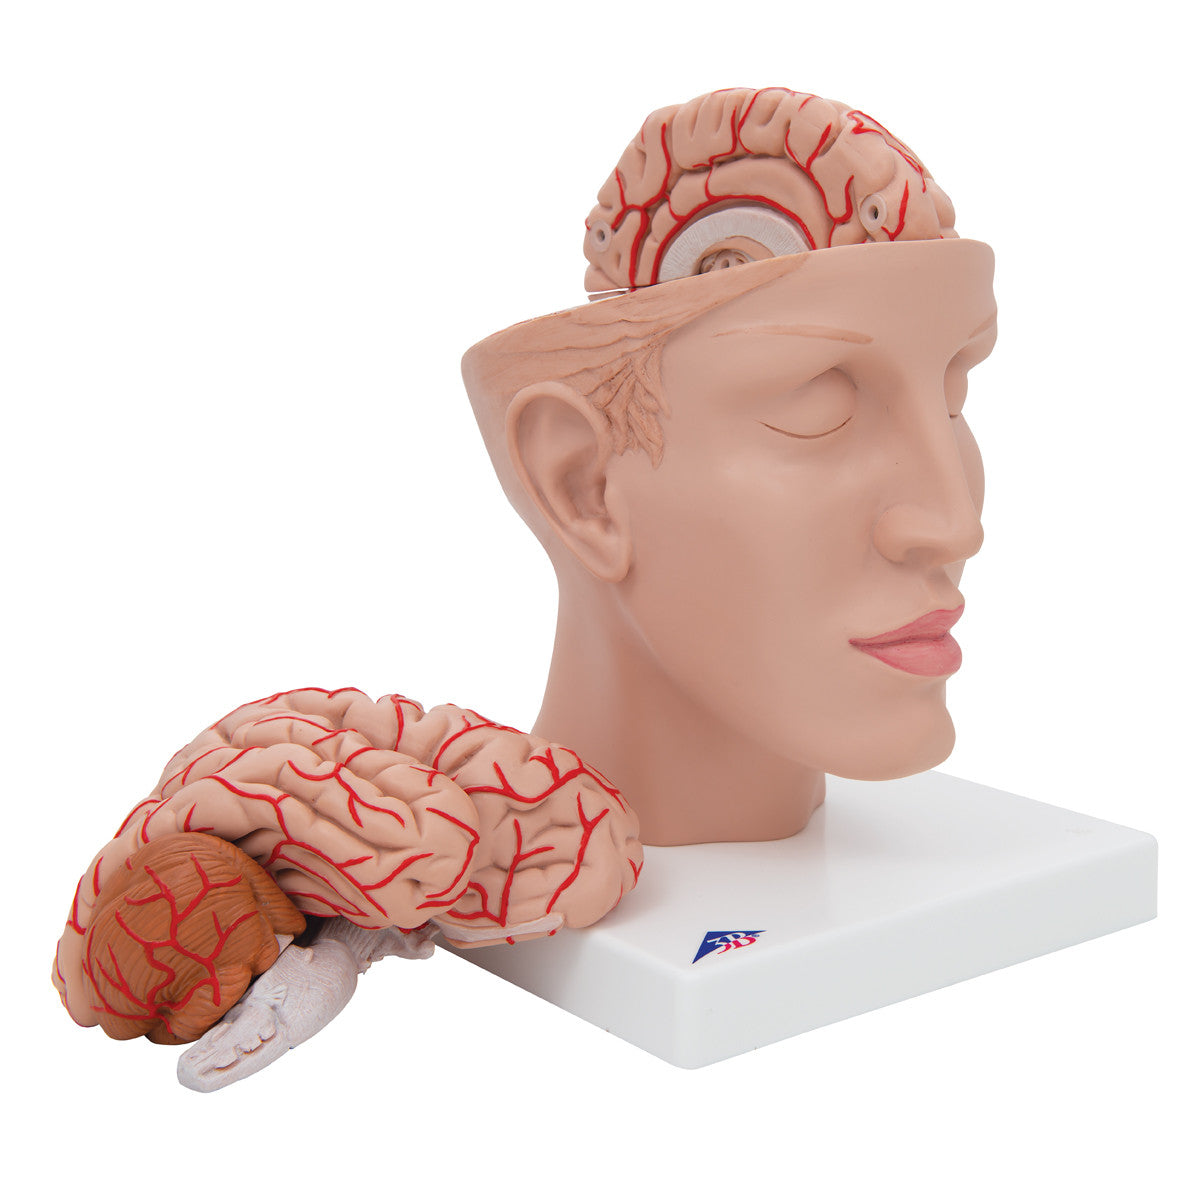 Deluxe Brain with Arteries on base of Head, 10 parts | 3B Scientific C25